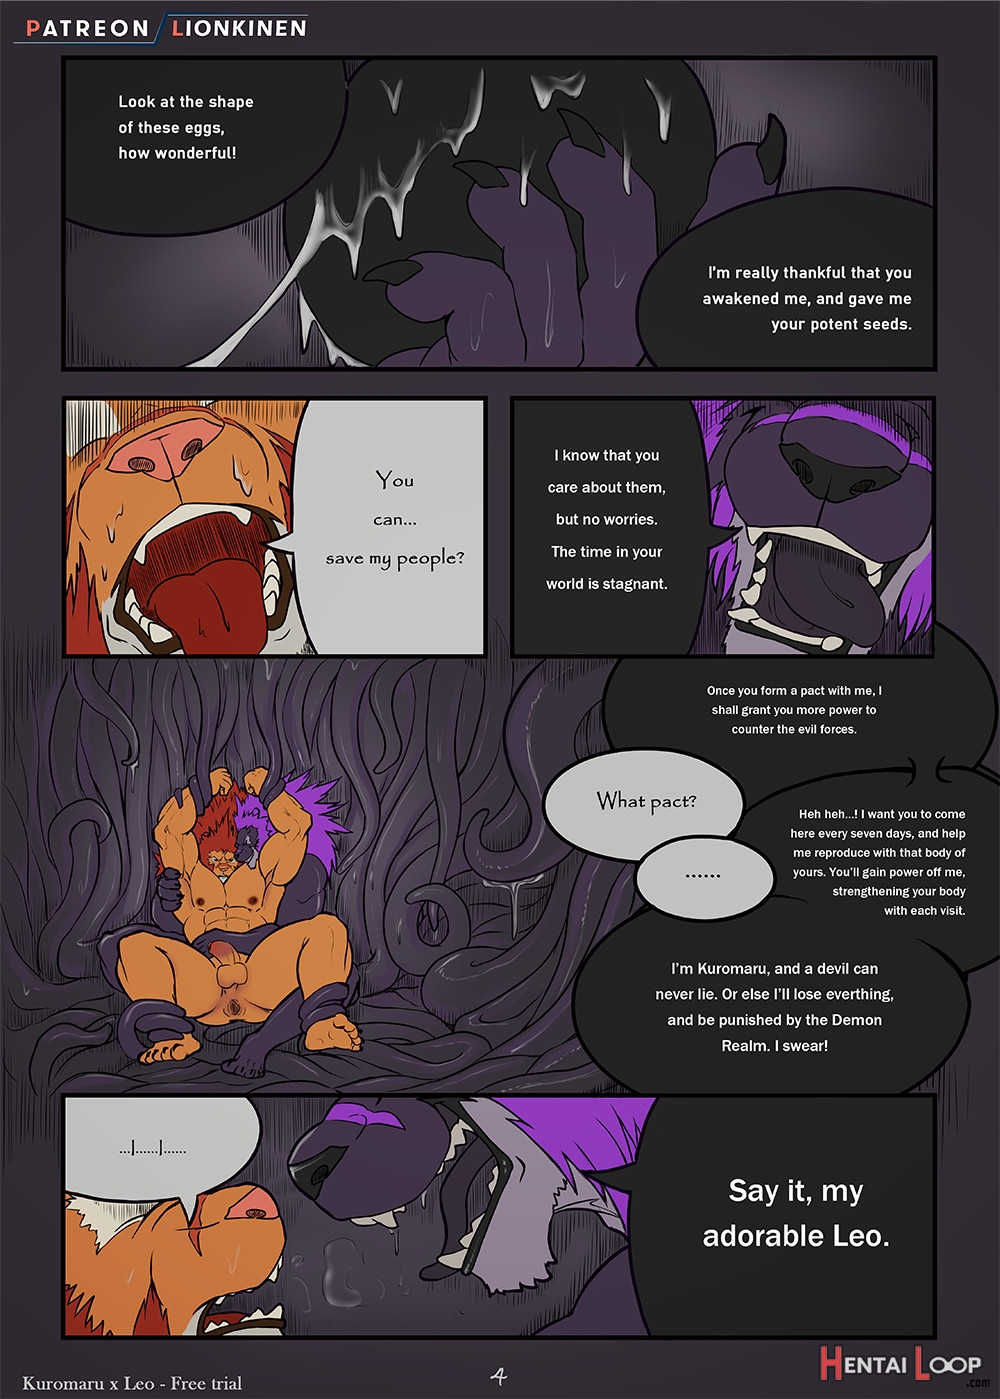 Demonic Pact – Reproduce – Red Earth Dj page 4